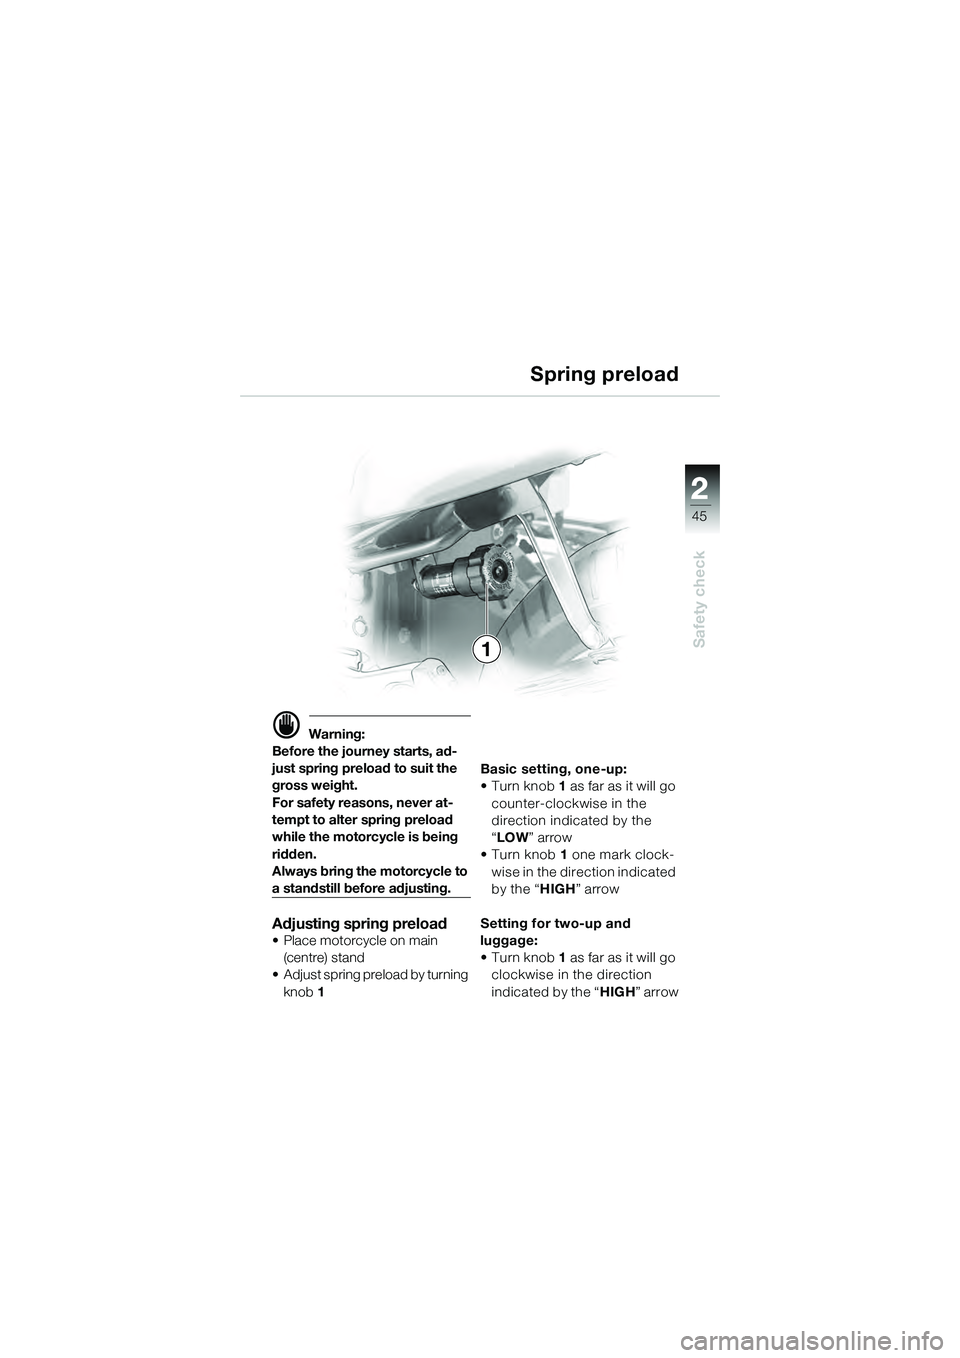 BMW MOTORRAD K 1200 GT 2004  Riders Manual (in English) 22
45
Safety check
2
 Warning:
Before the journey starts, ad-
just spring preload to suit the 
gross weight.
For safety reasons, never at-
tempt to alter spring preload 
while the motorcycle is being